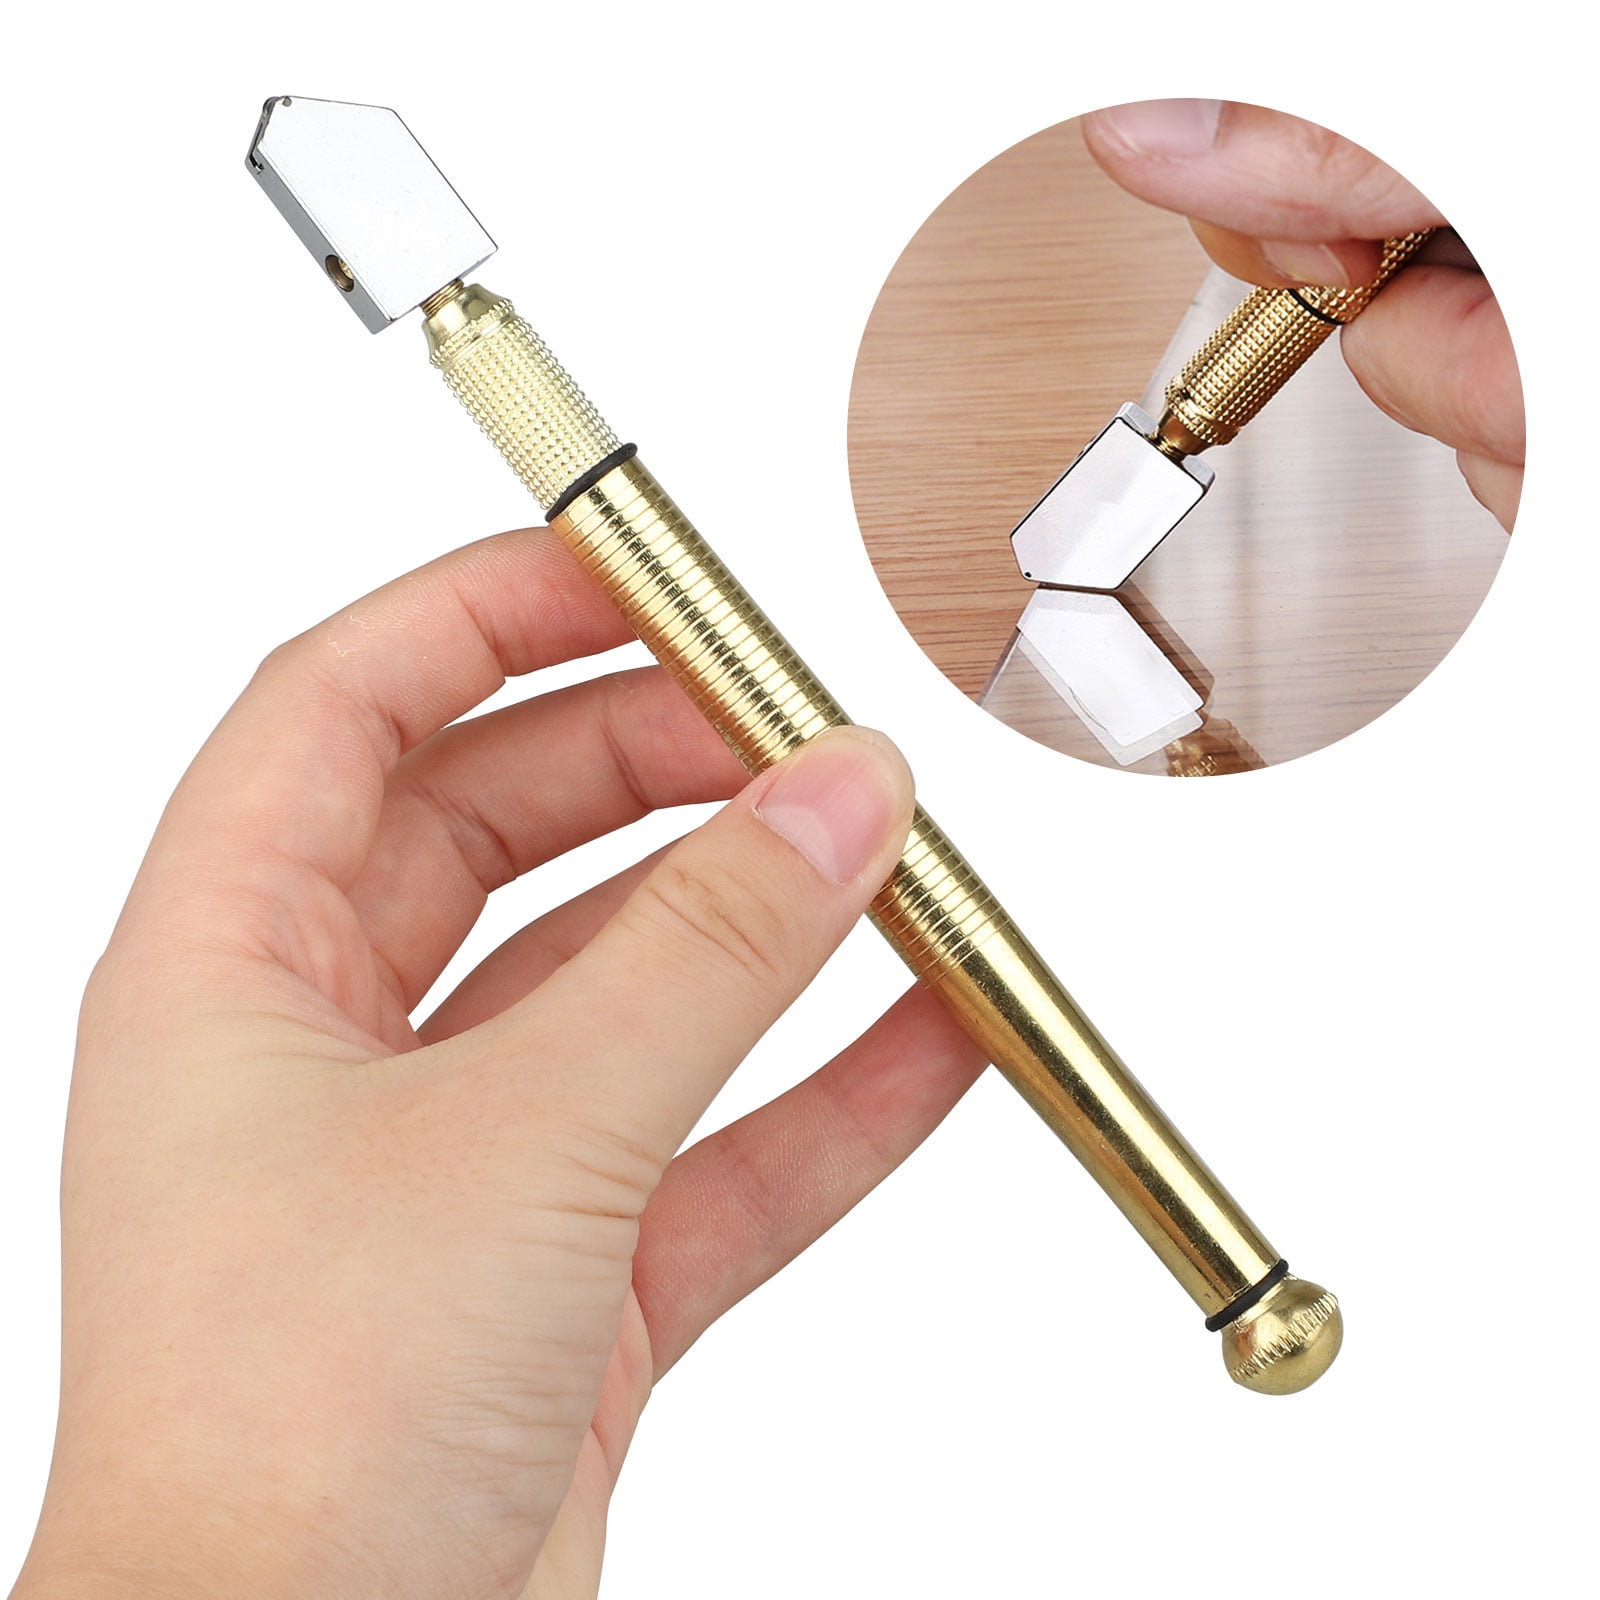 3Pcs Glass Cutter for Mirror, Glass Cutting Tool DIY Glass Cutting Kit,  General Tools Glass Cutter, 2mm-20mm Pencil Style Oil Feed Carbide Tip  Mirror